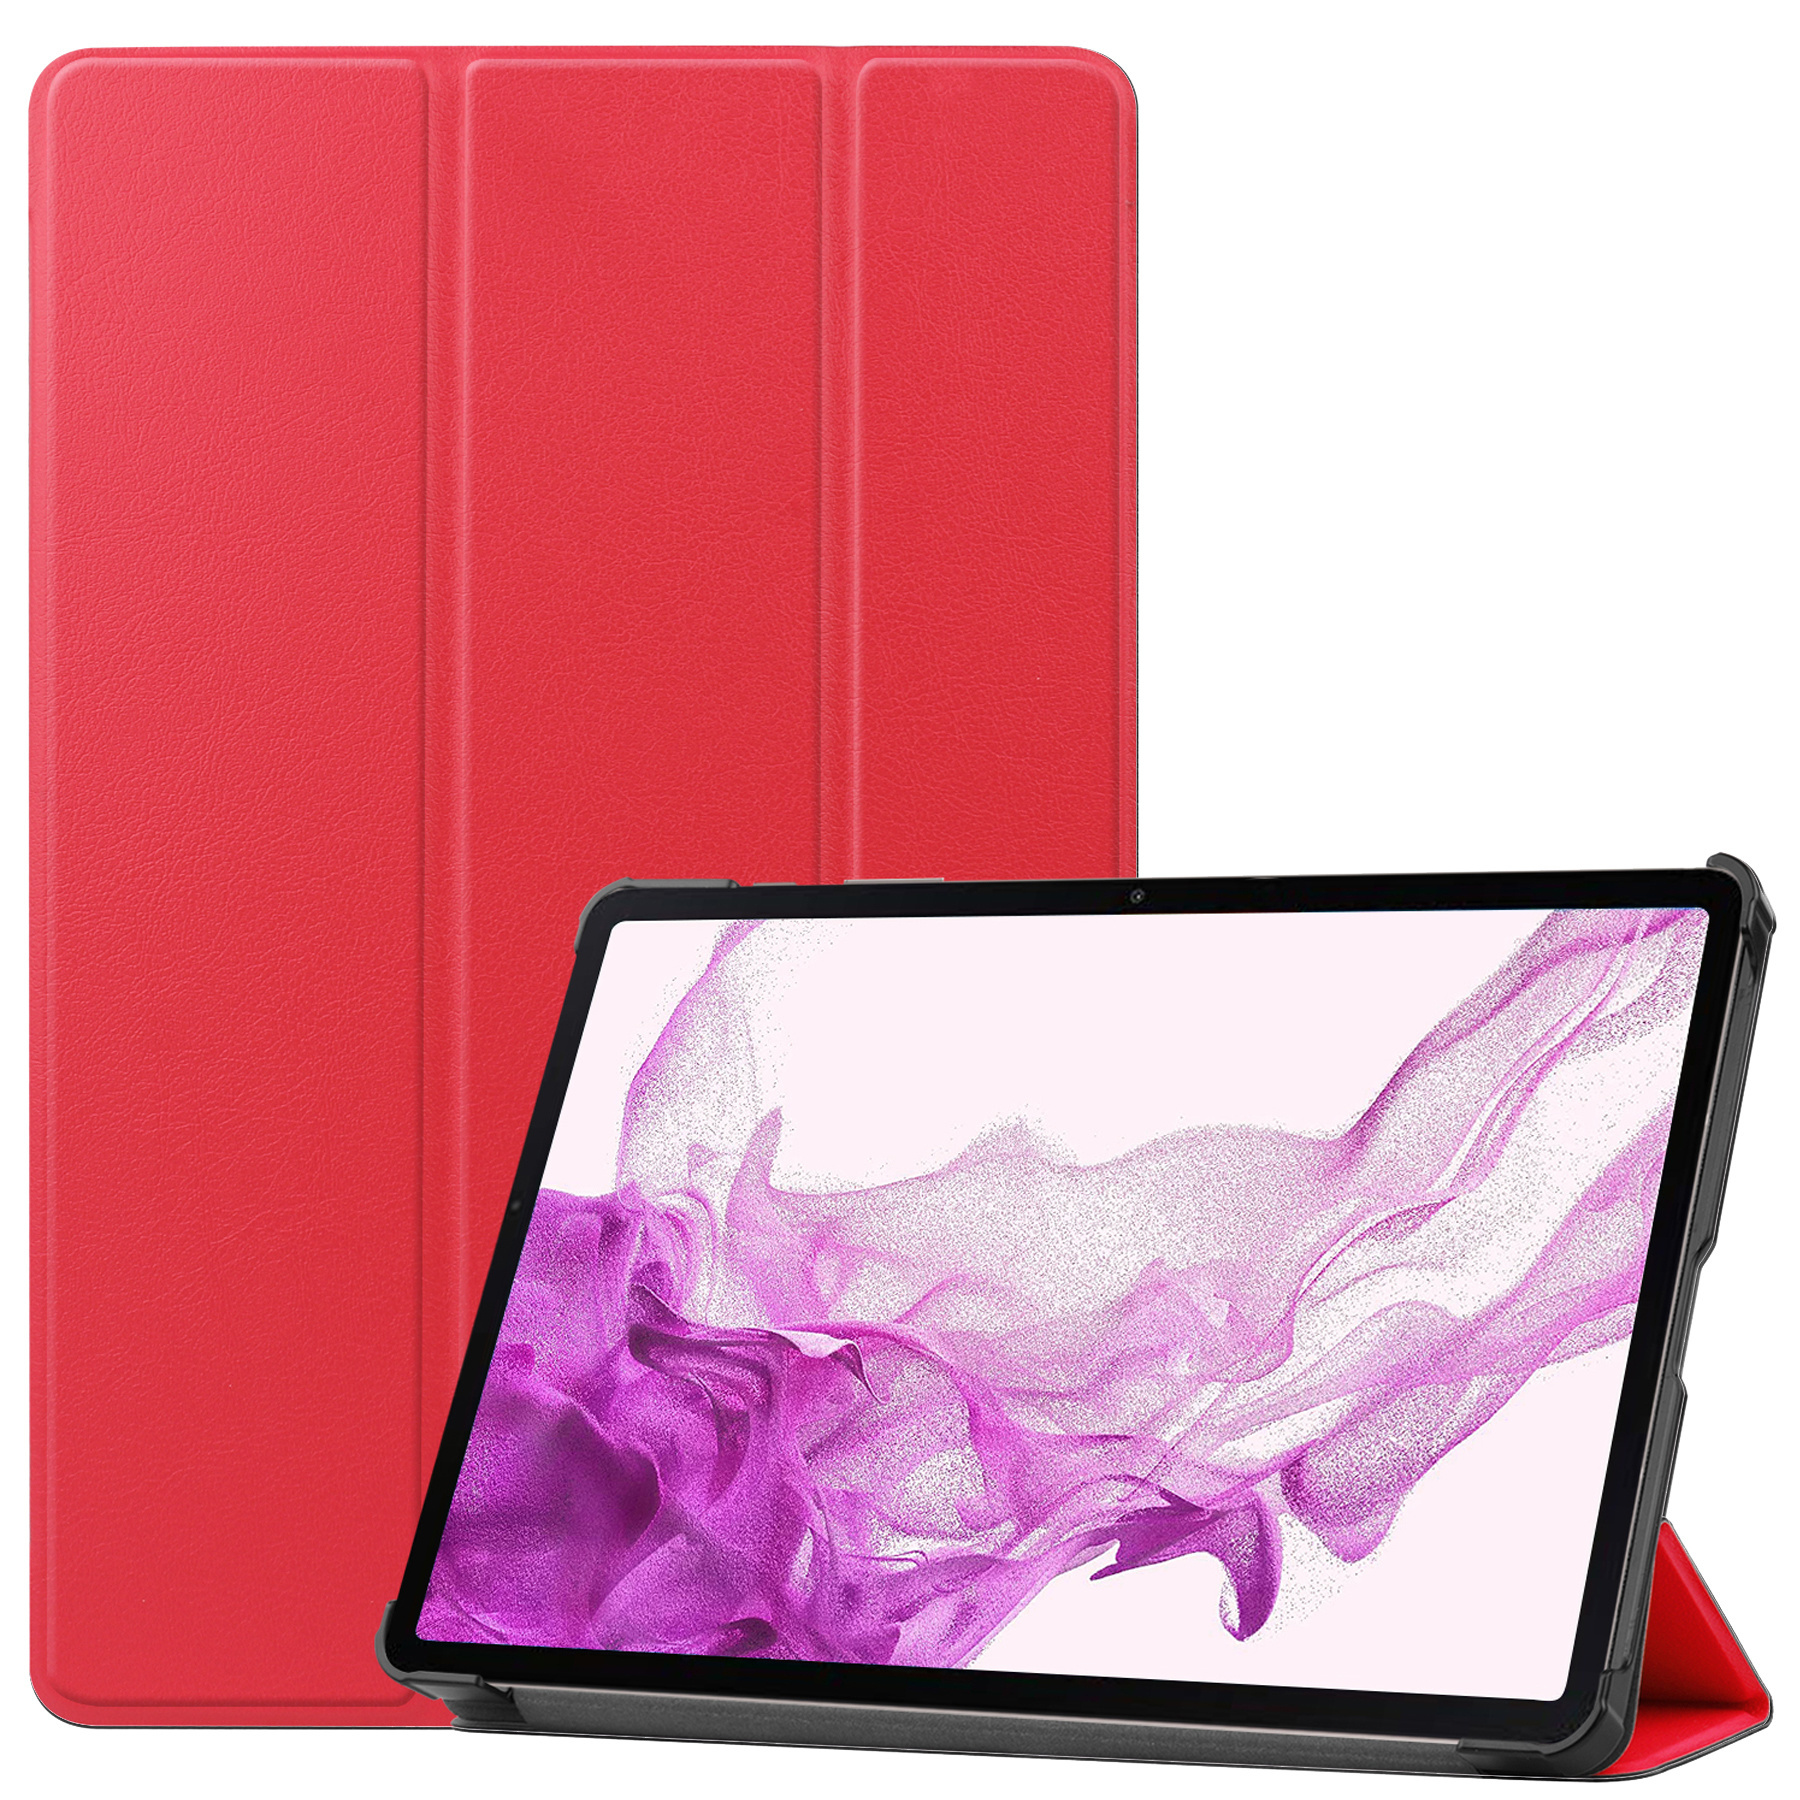 Samsung Galaxy Tab S8 Ultra Hoesje 14.6 inch Case Rood - Samsung Galaxy Tab S8 Ultra Hoes Hardcover Hoesje Bookcase Met Uitsparing S Pen - Rood